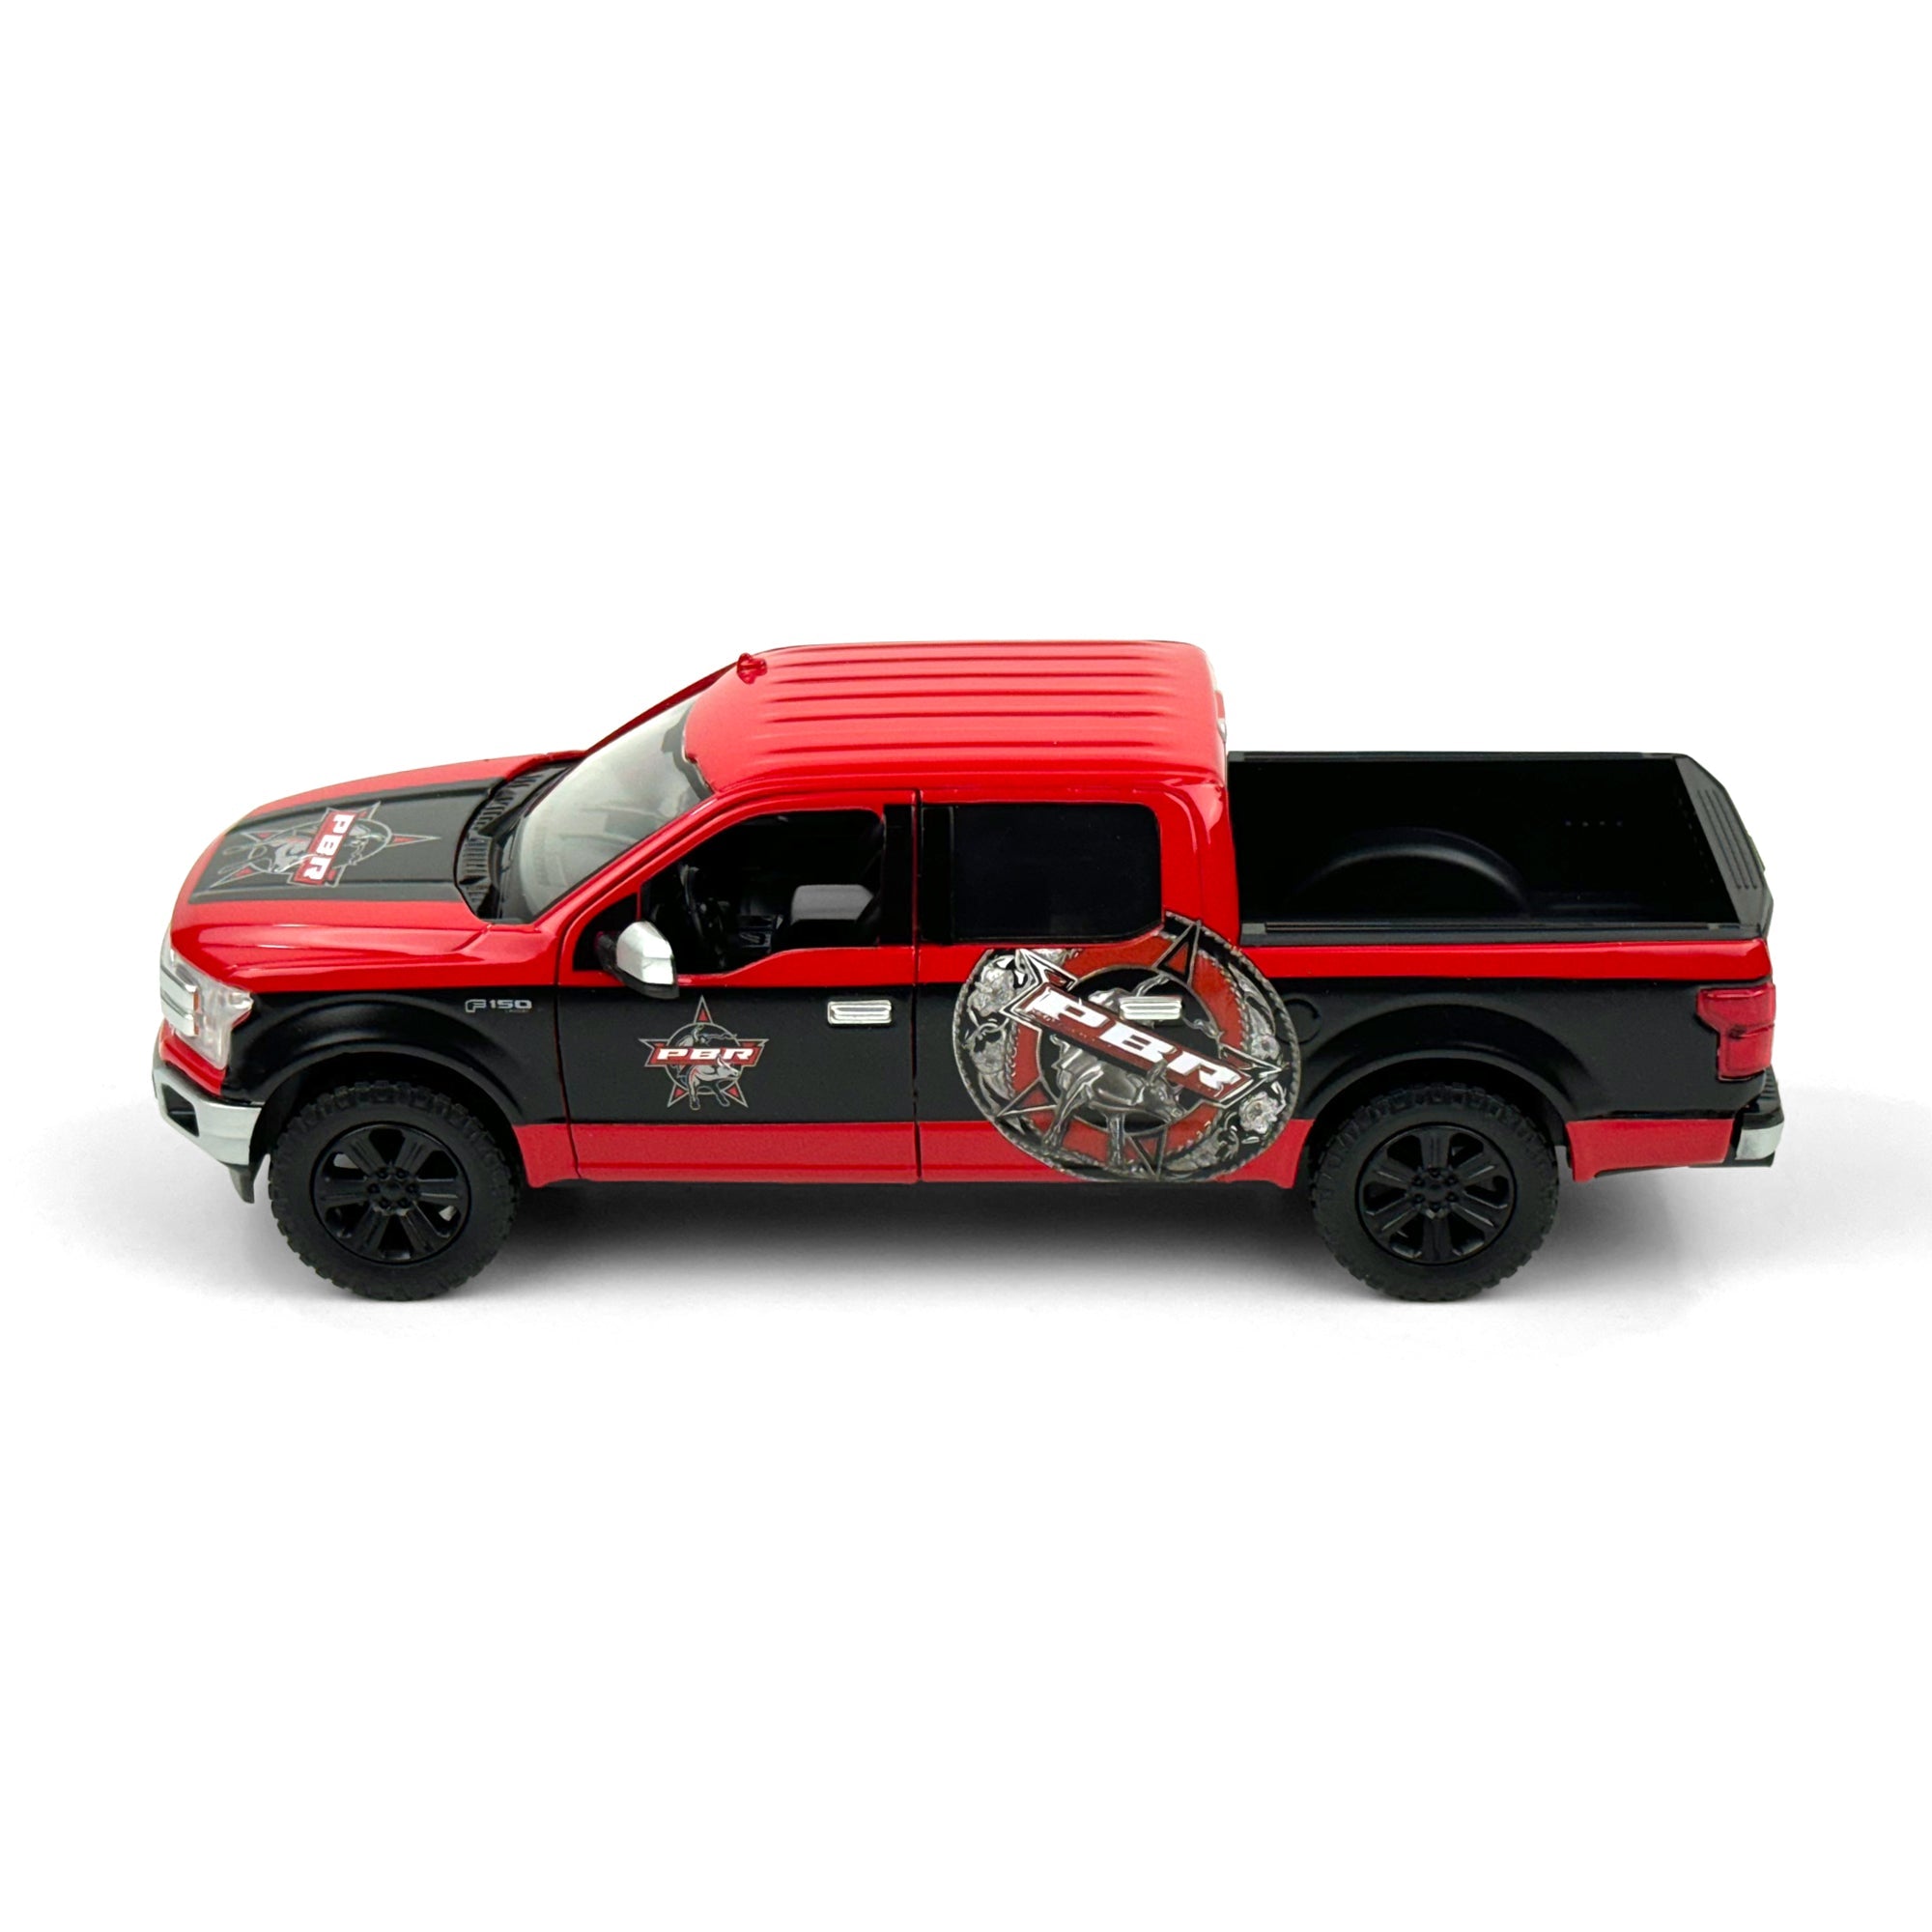 1:27 Scale Die-Cast – PBR® 2019 Ford F-150 Lariat